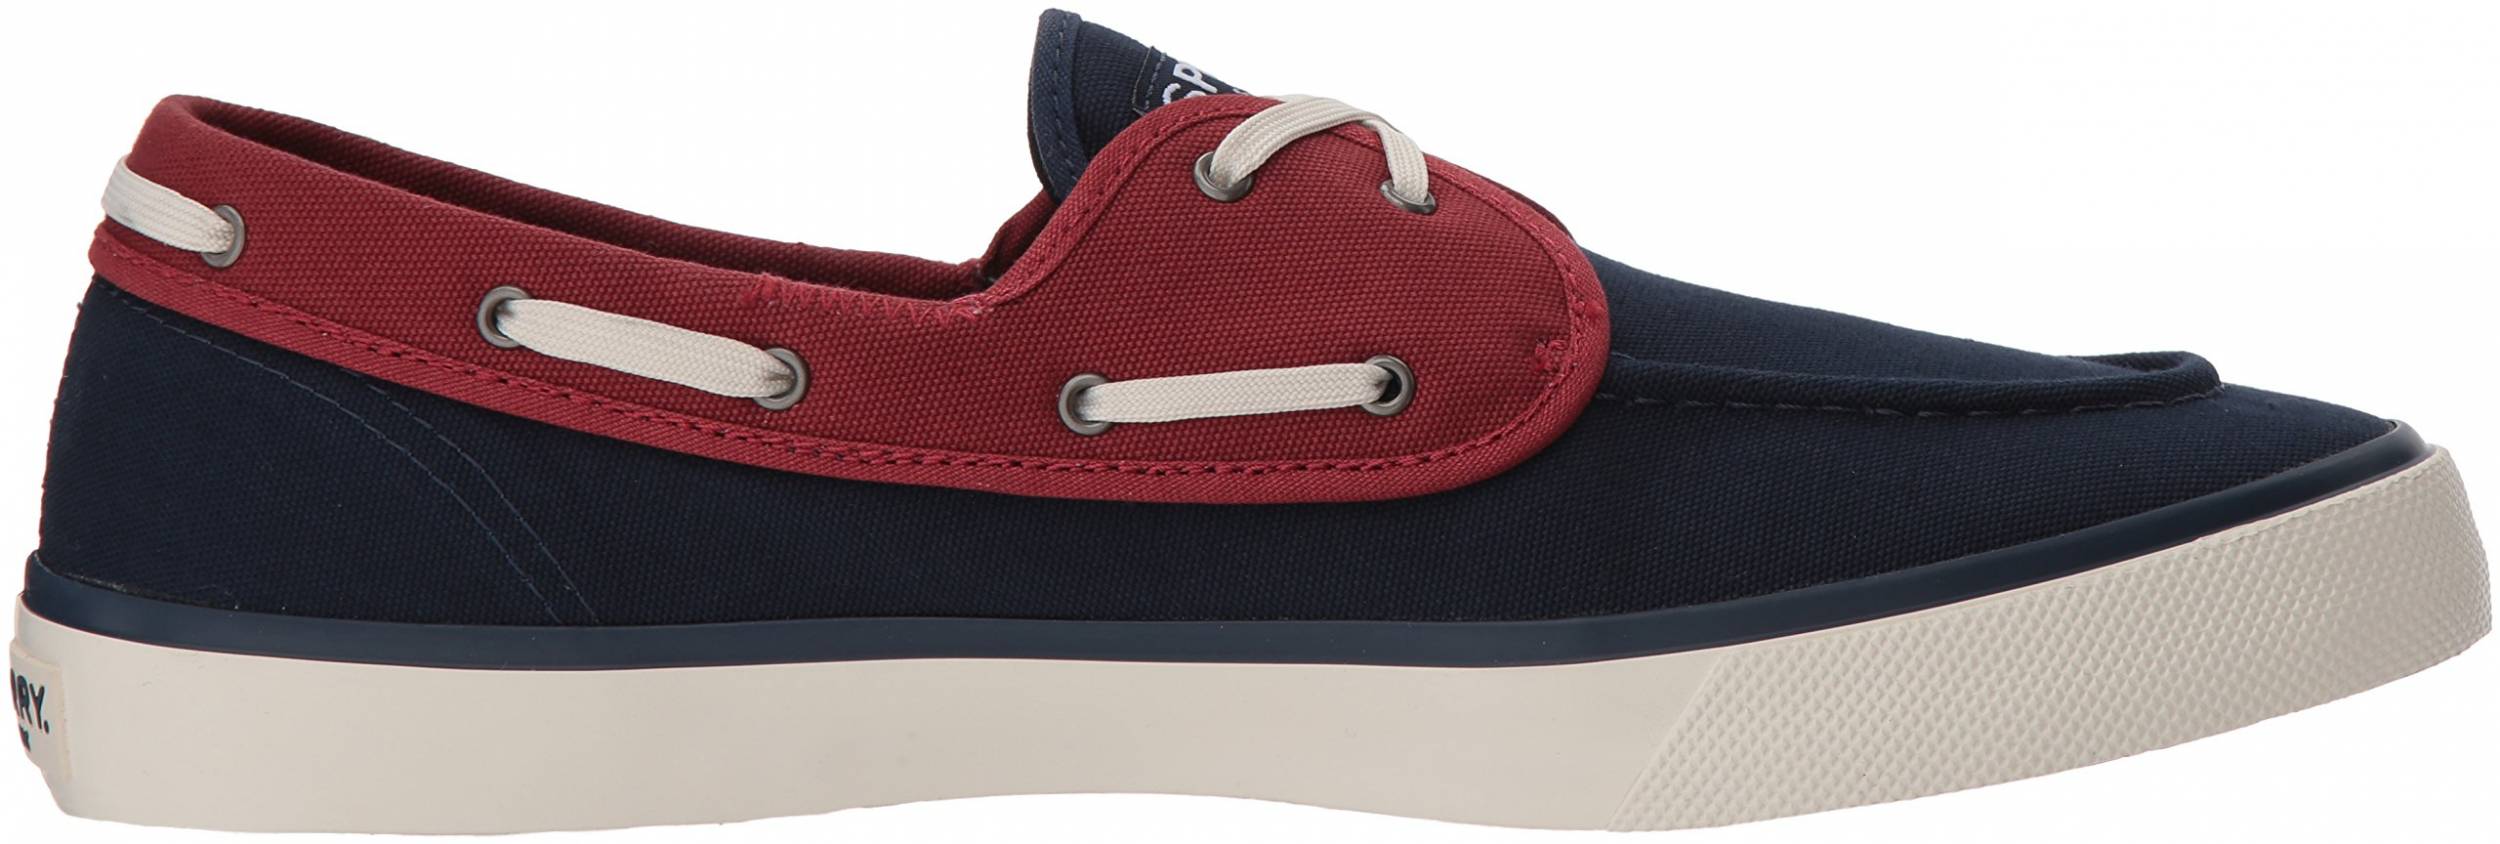 sperry red sneakers